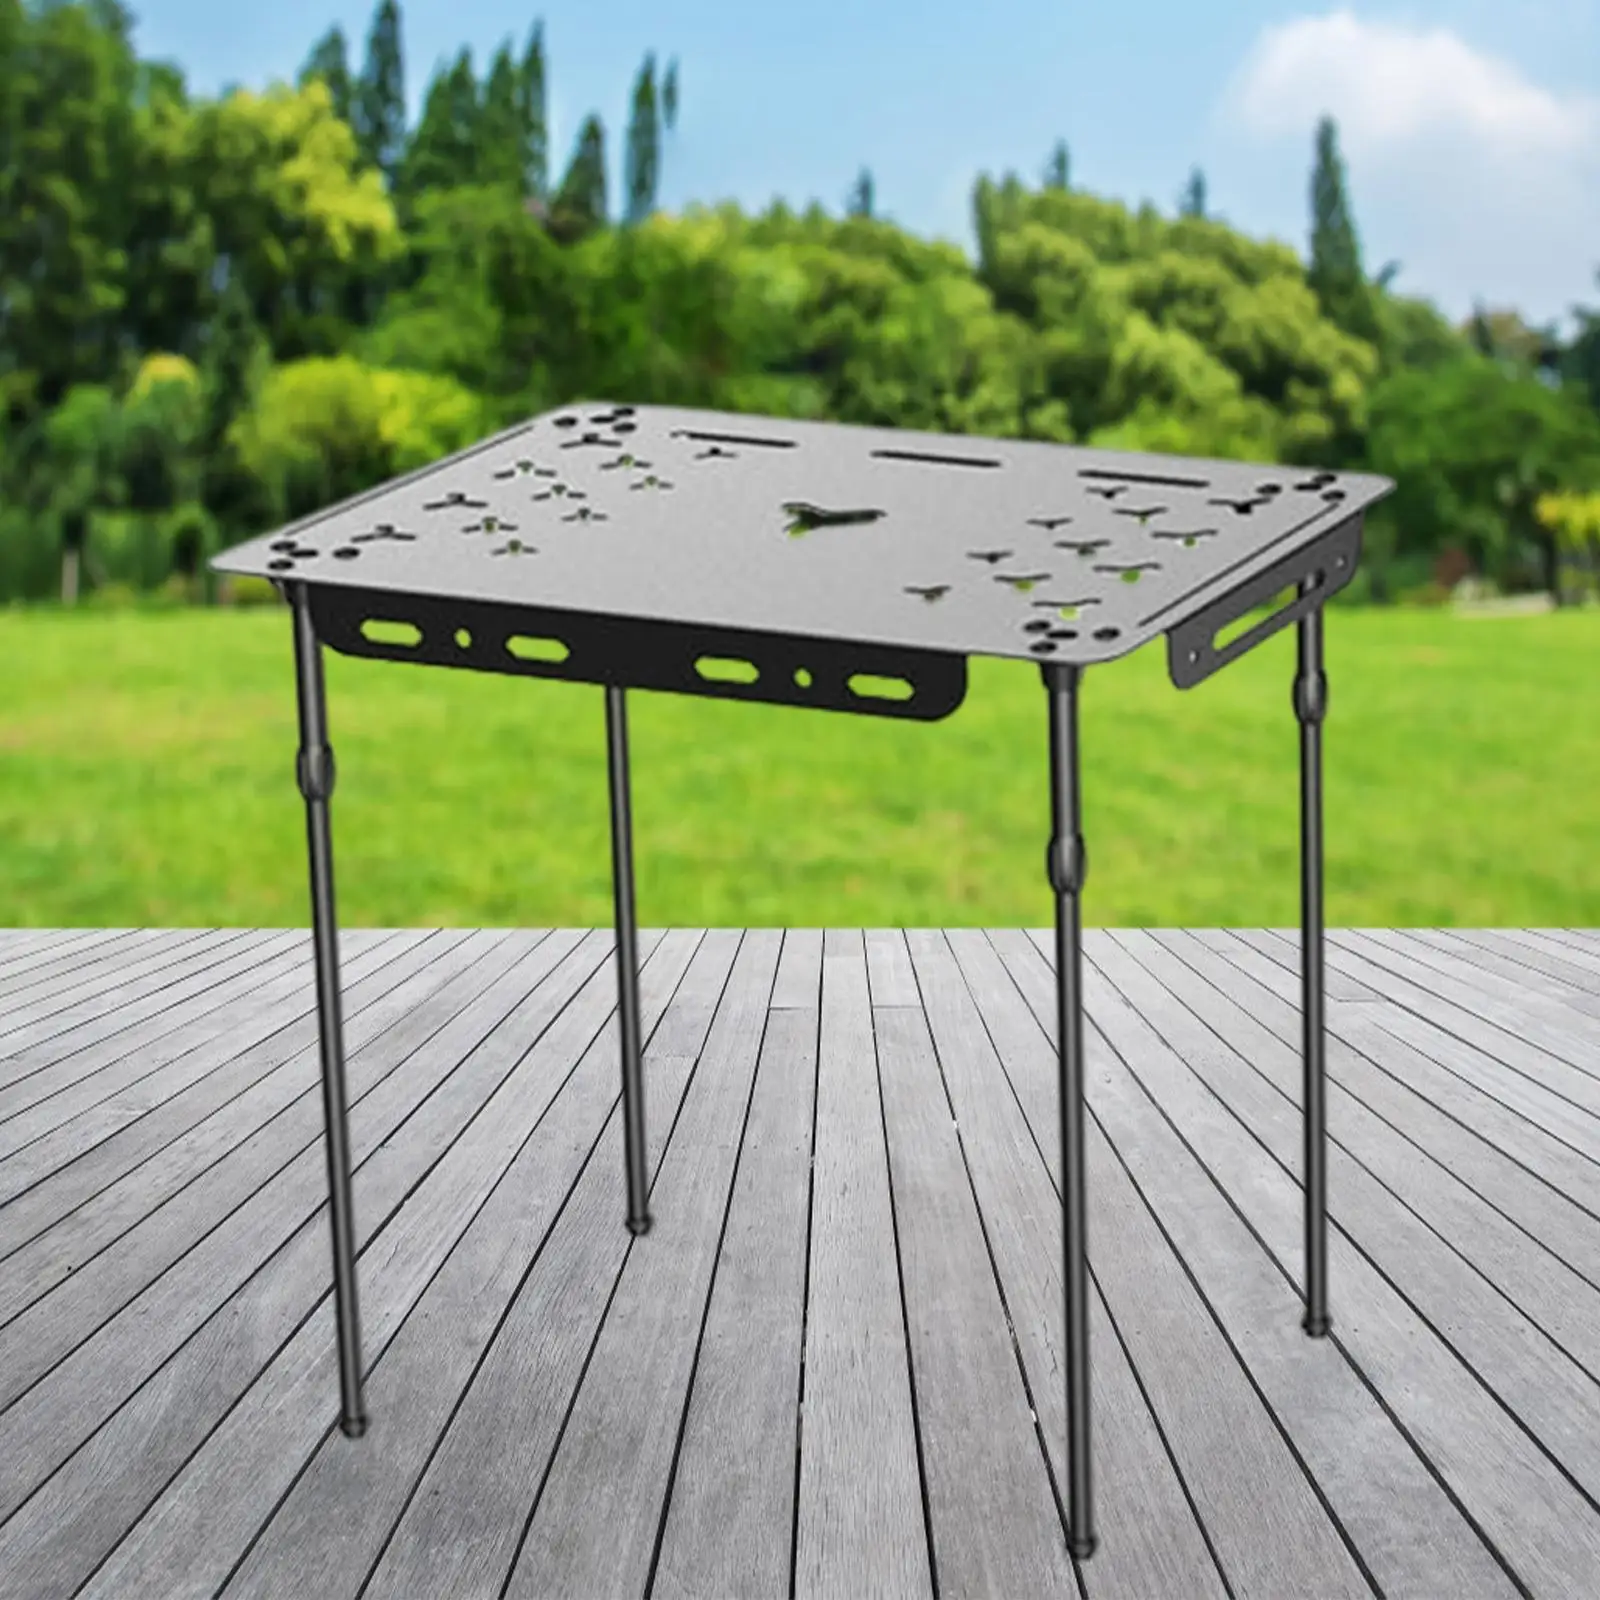 Camping Folding Dining Table Collapsible Stand for Picnic Traveling Beach Balcony